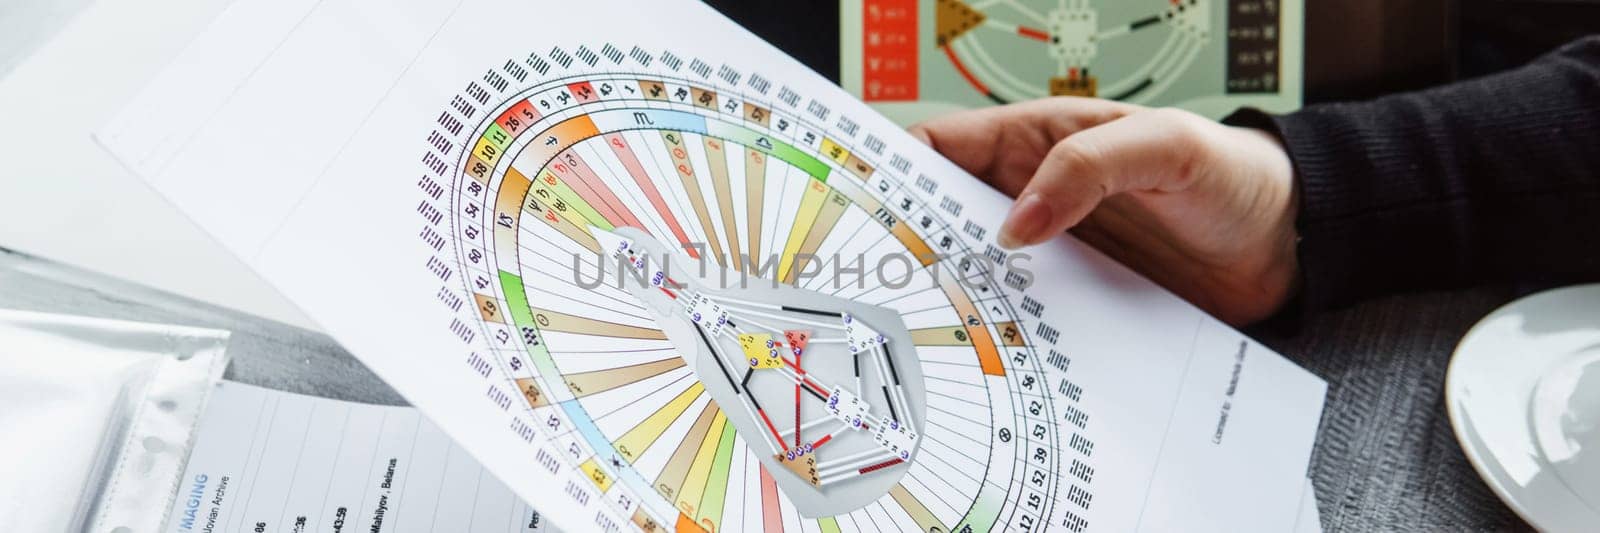 TVER, RUSSIA - FEBRUARY 12, 2023: A woman at the table is studying a rave mandala by human design. Rave mandala on the table close-up. The concept of esoteric teachings. by Annu1tochka